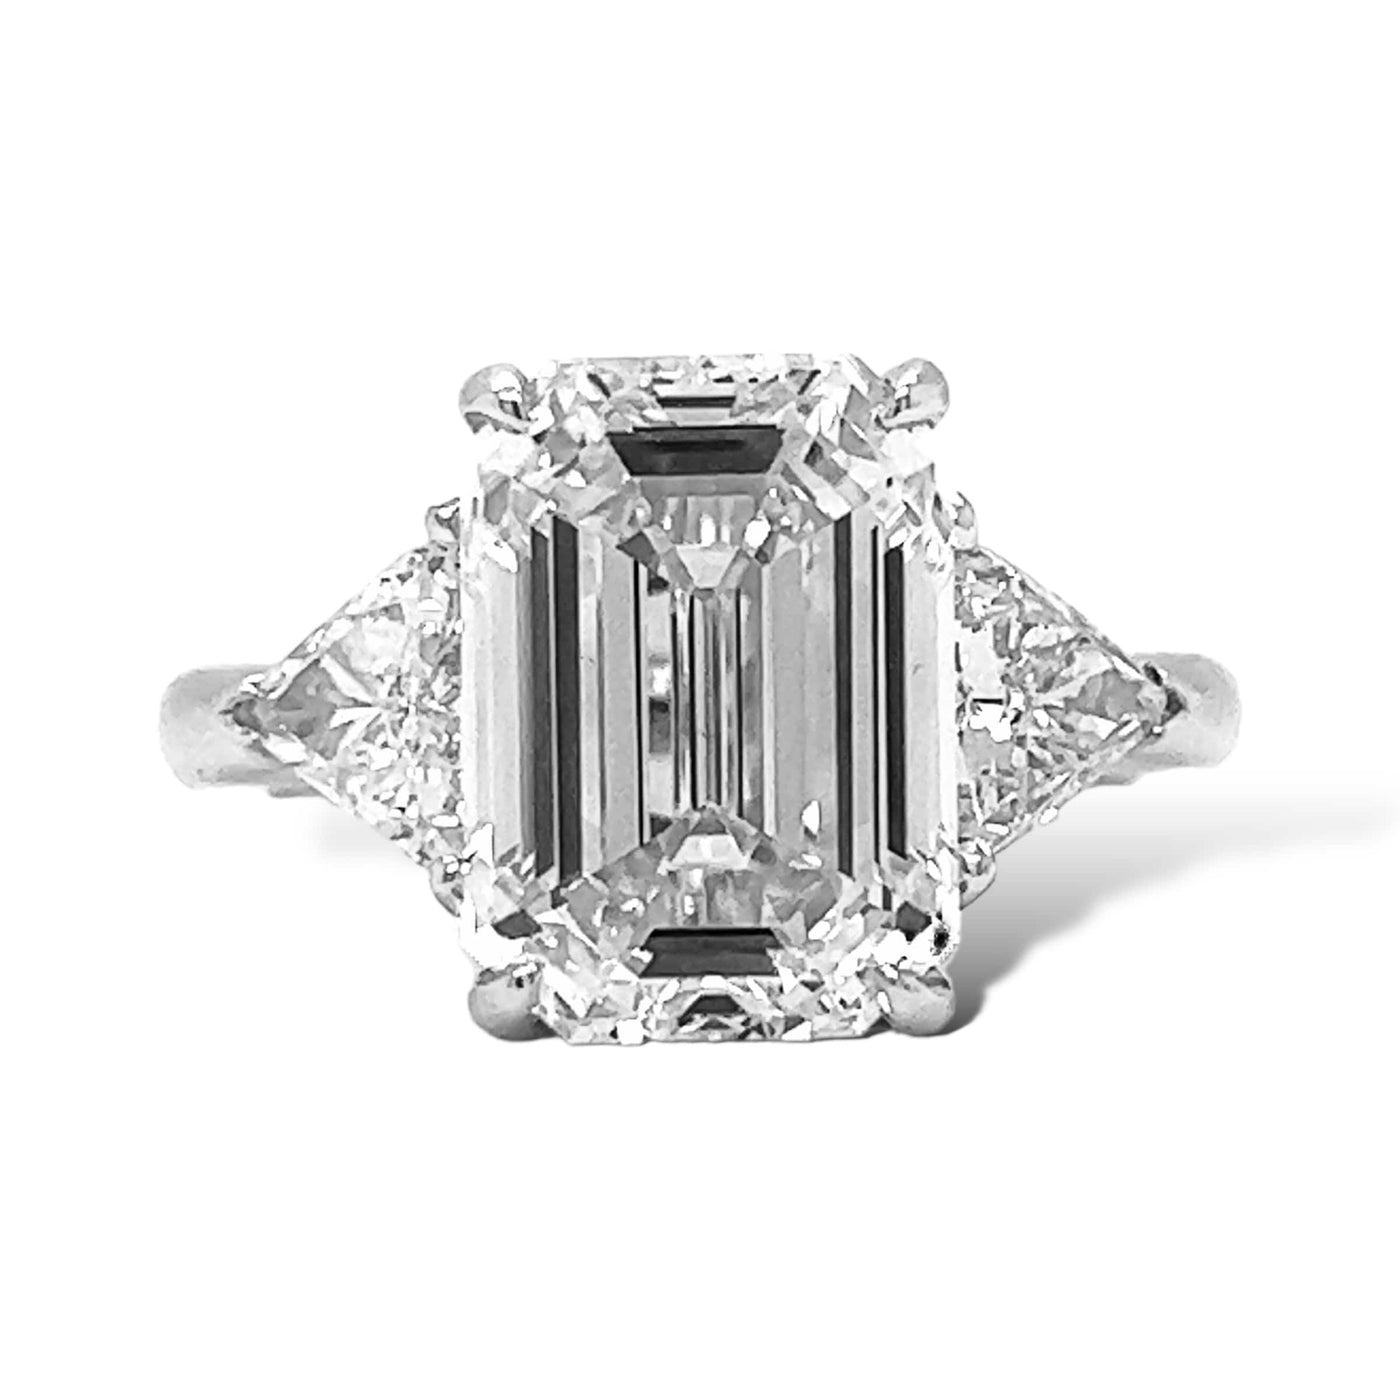 RADIANT CUT DIAMOND WITH TRIANGLE CUT DIAMONDS ON THE SIDES